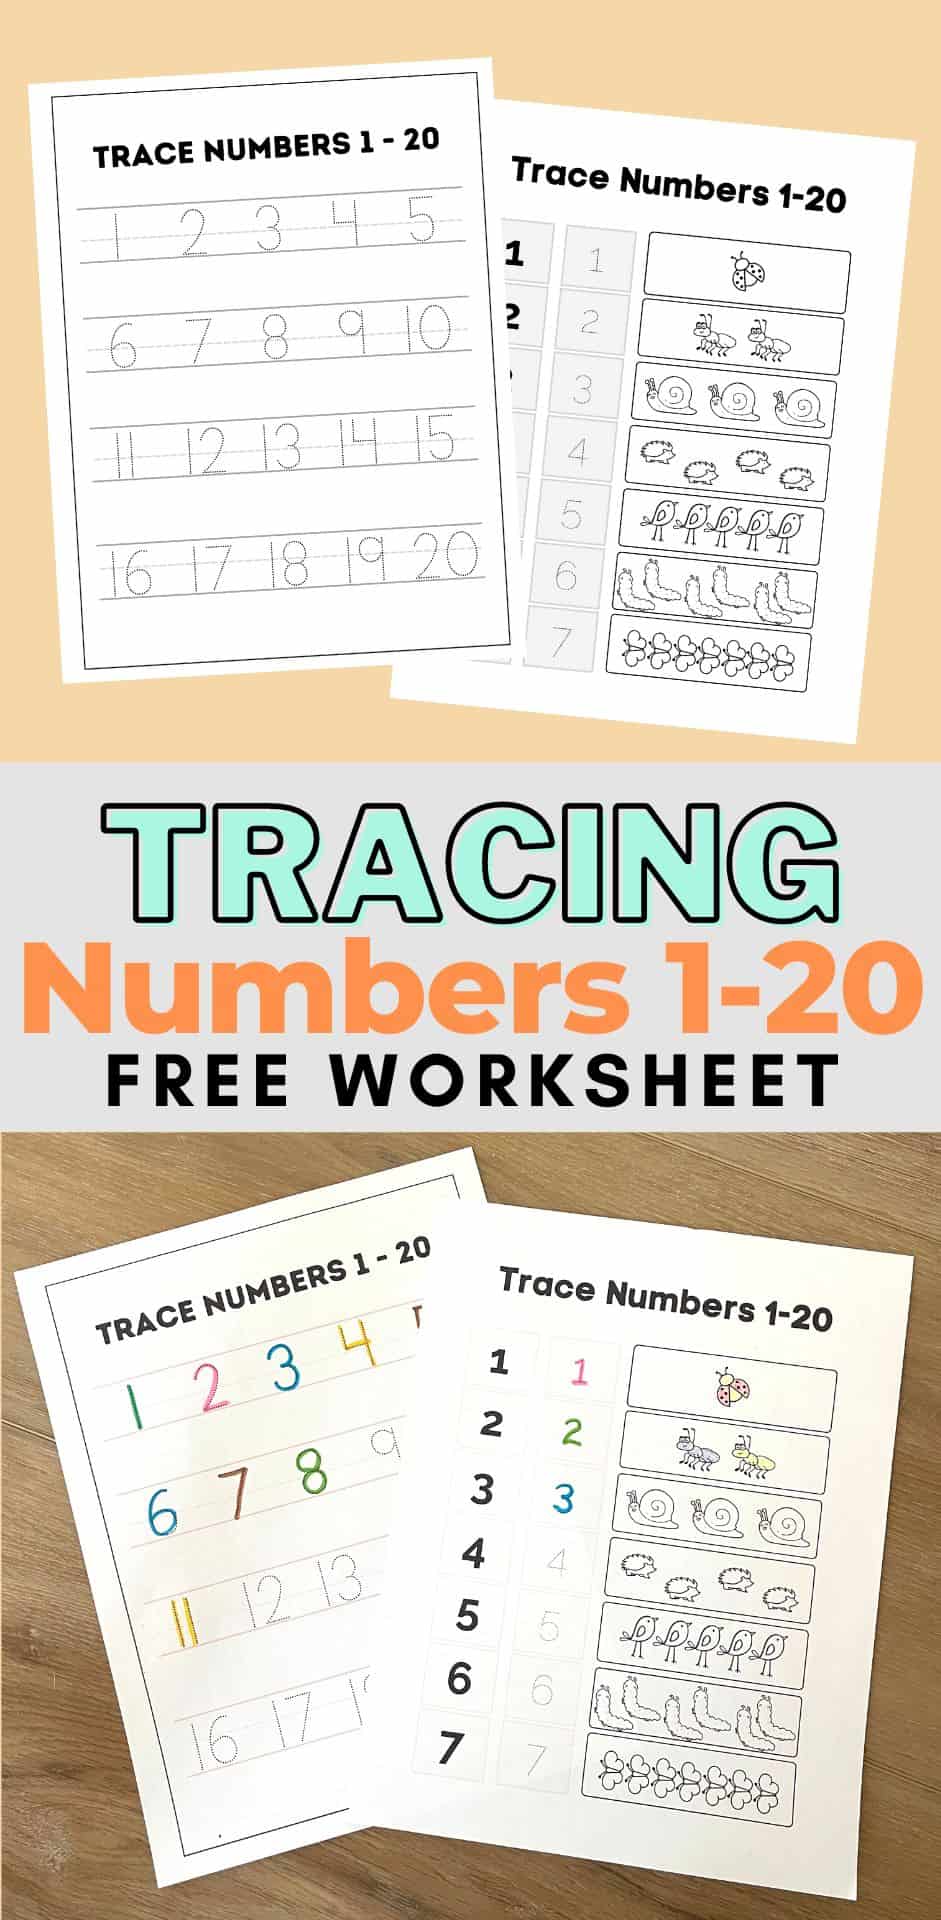 Tracing Numbers 1-20